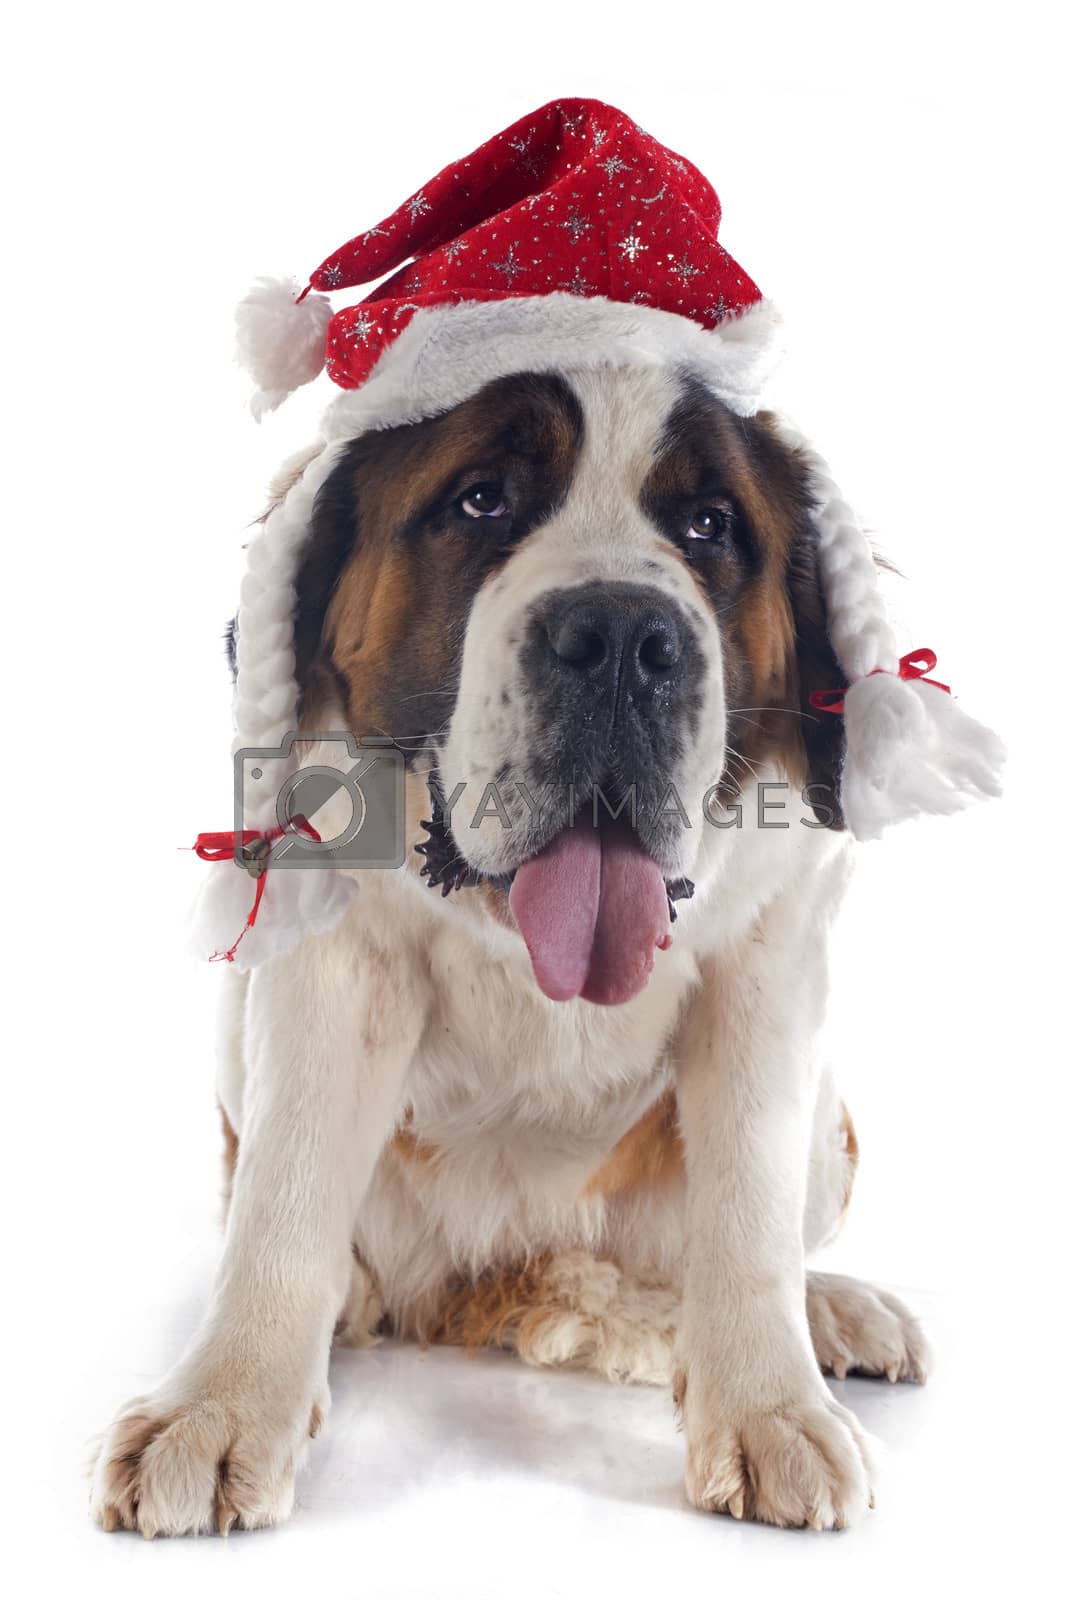 Royalty free image of Saint Bernard and hat by cynoclub